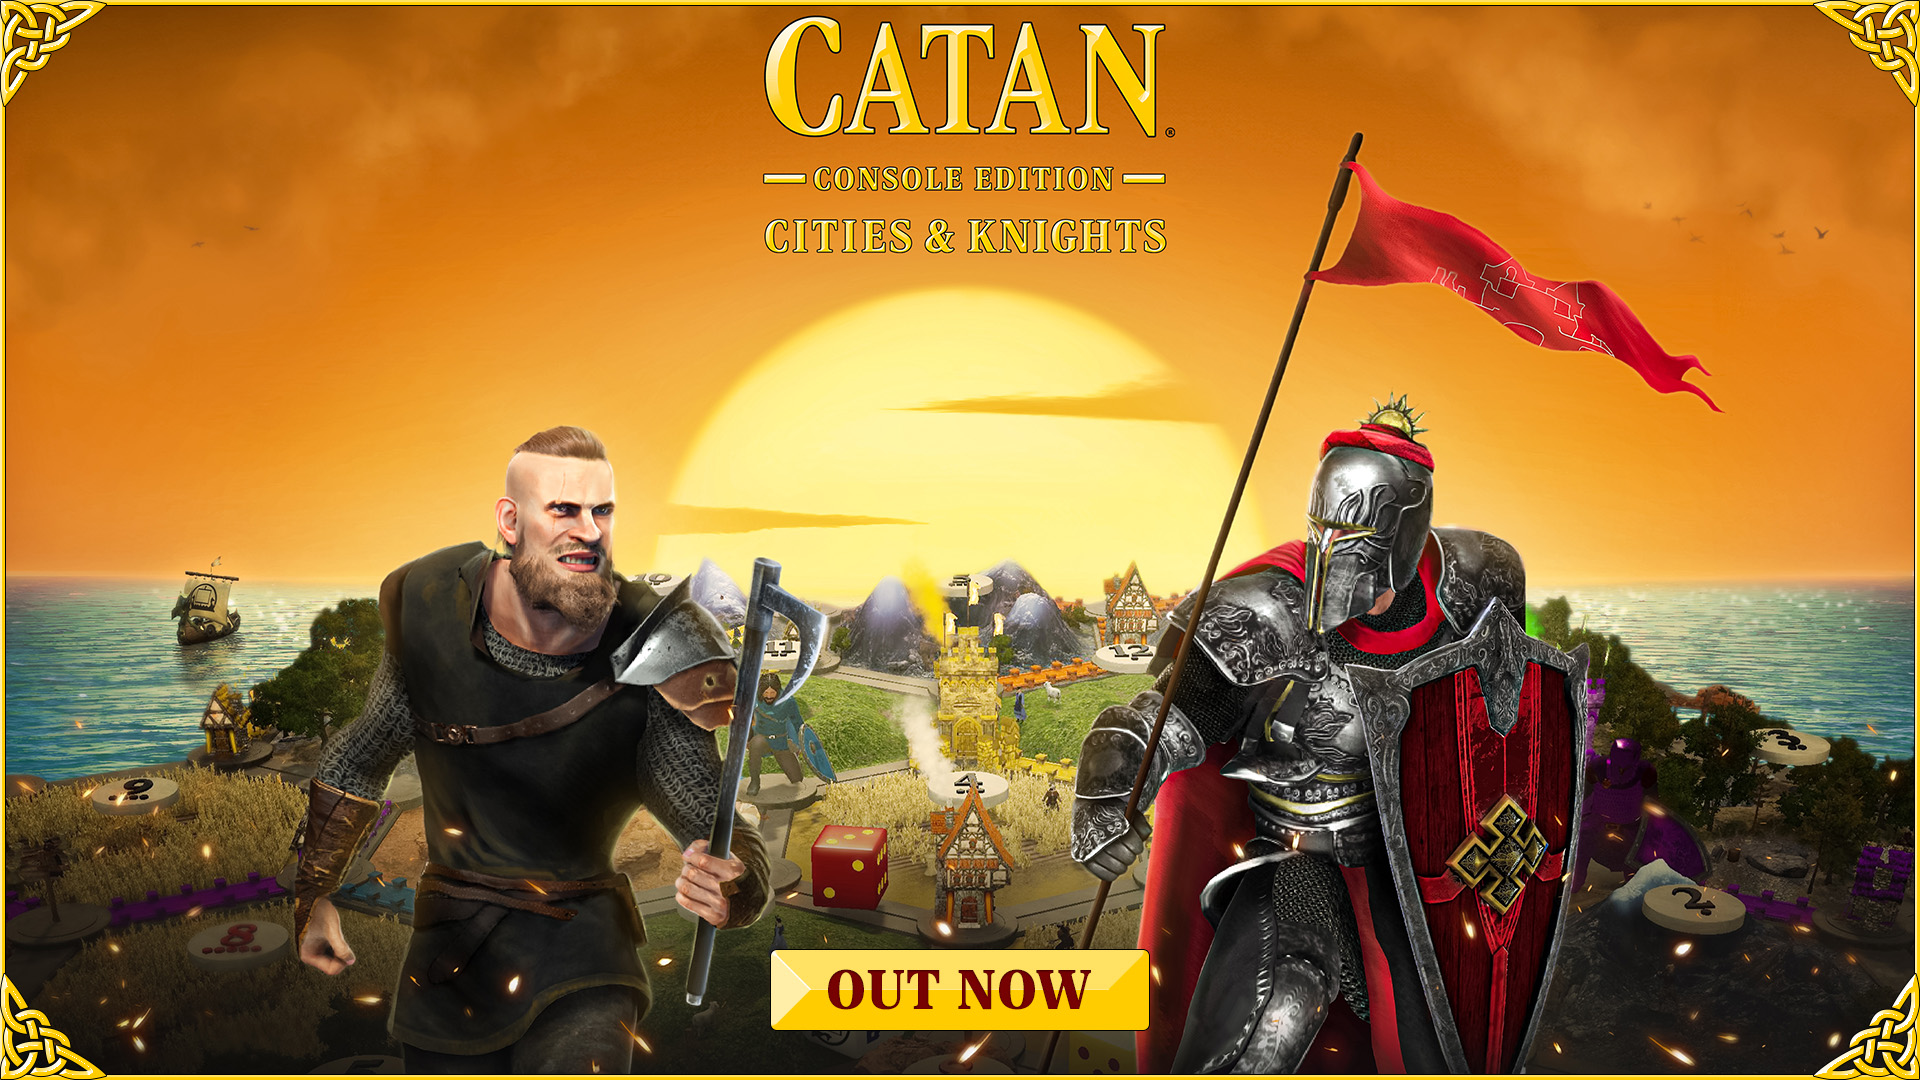 CATAN Console Edition - Cities & Knights 